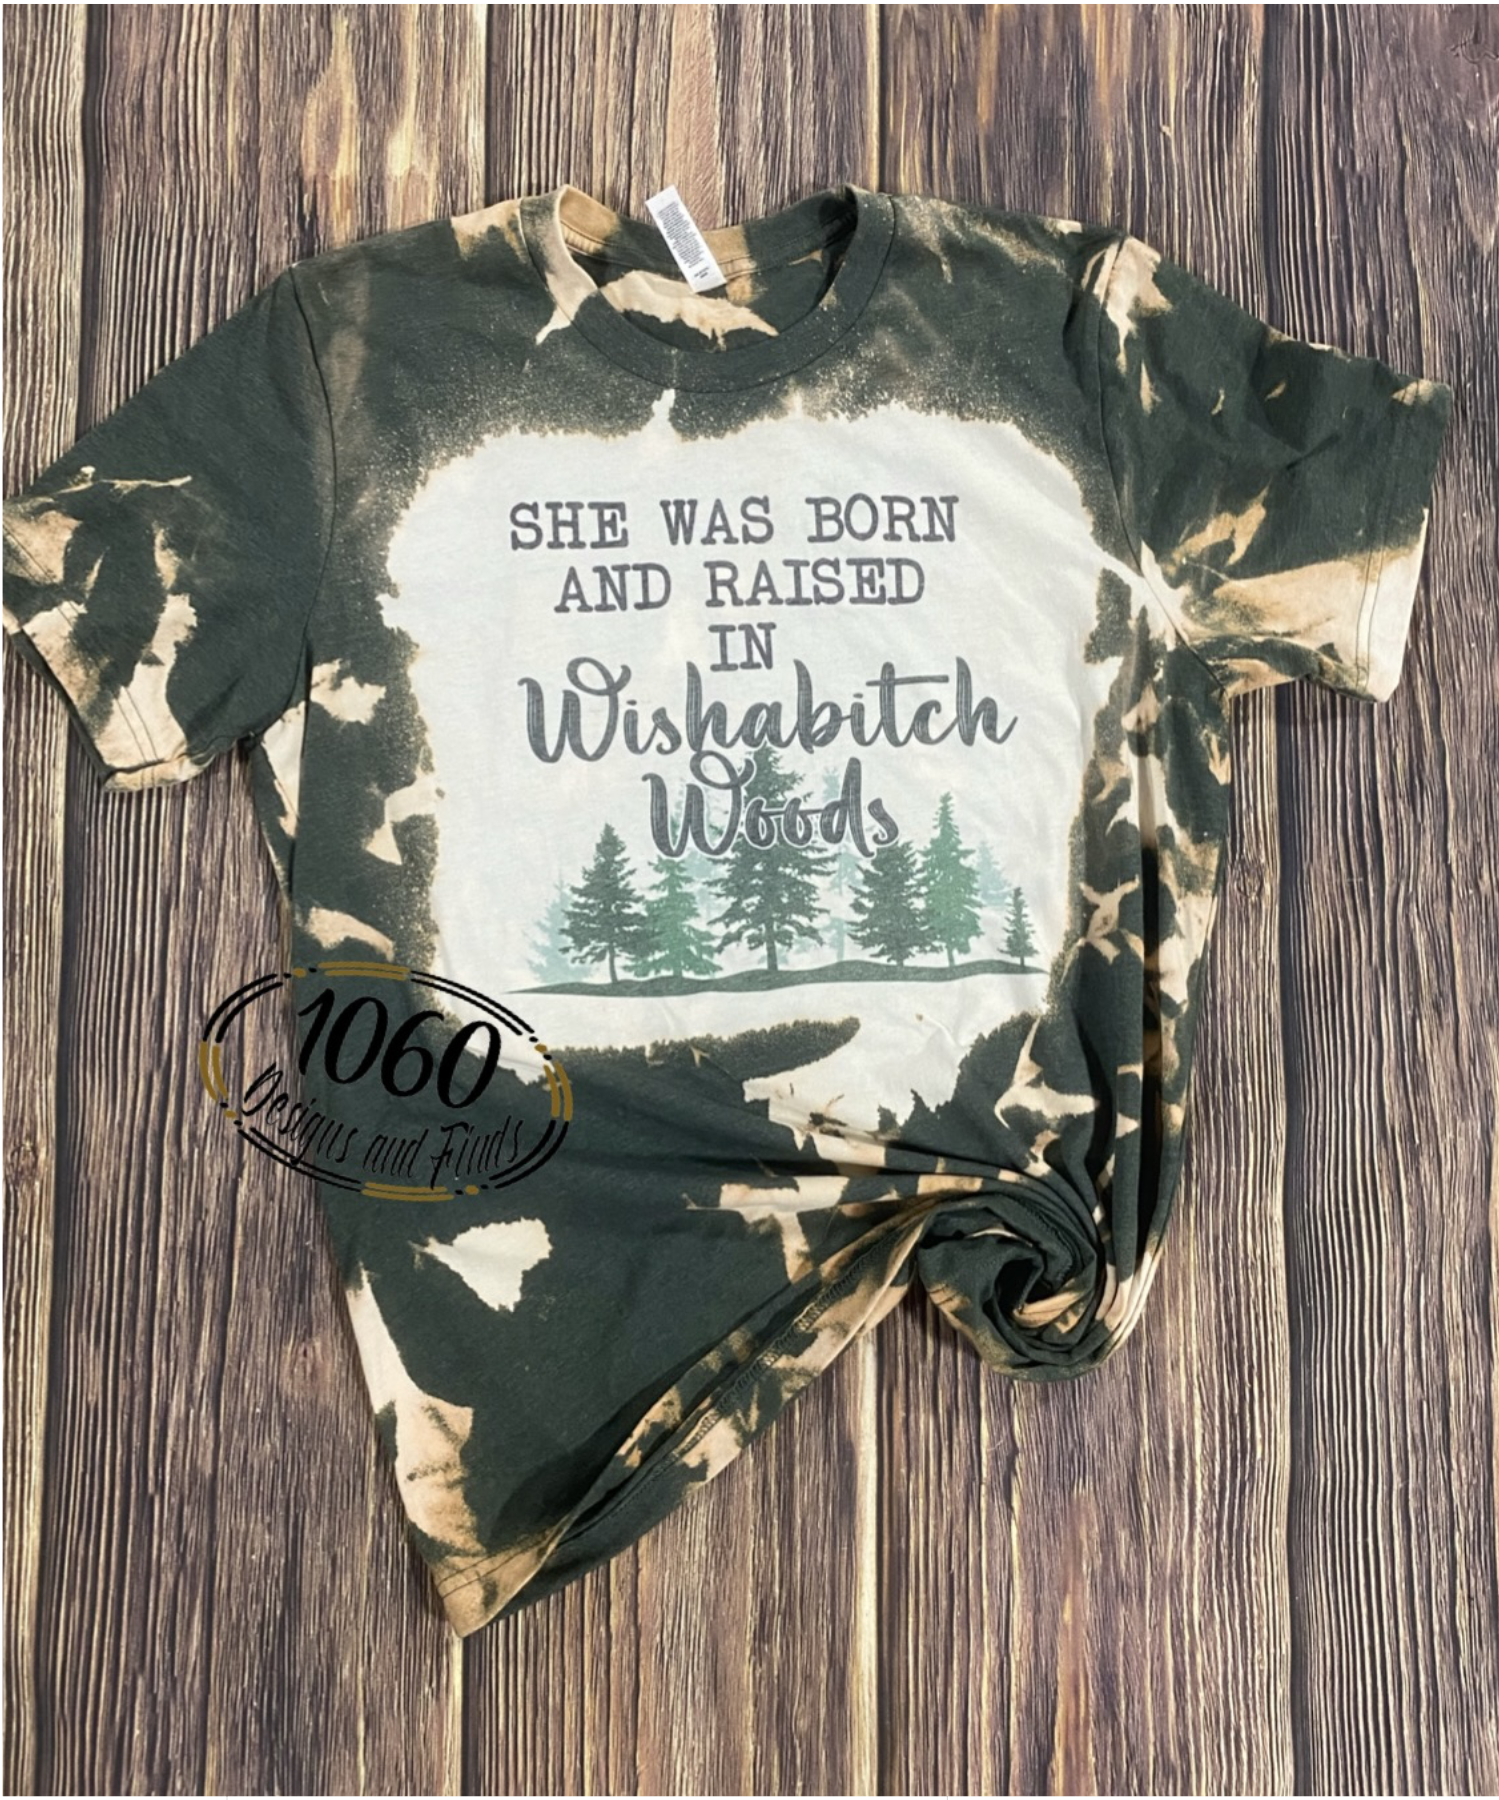 She was born in Wishabitch Woods bleached Tee